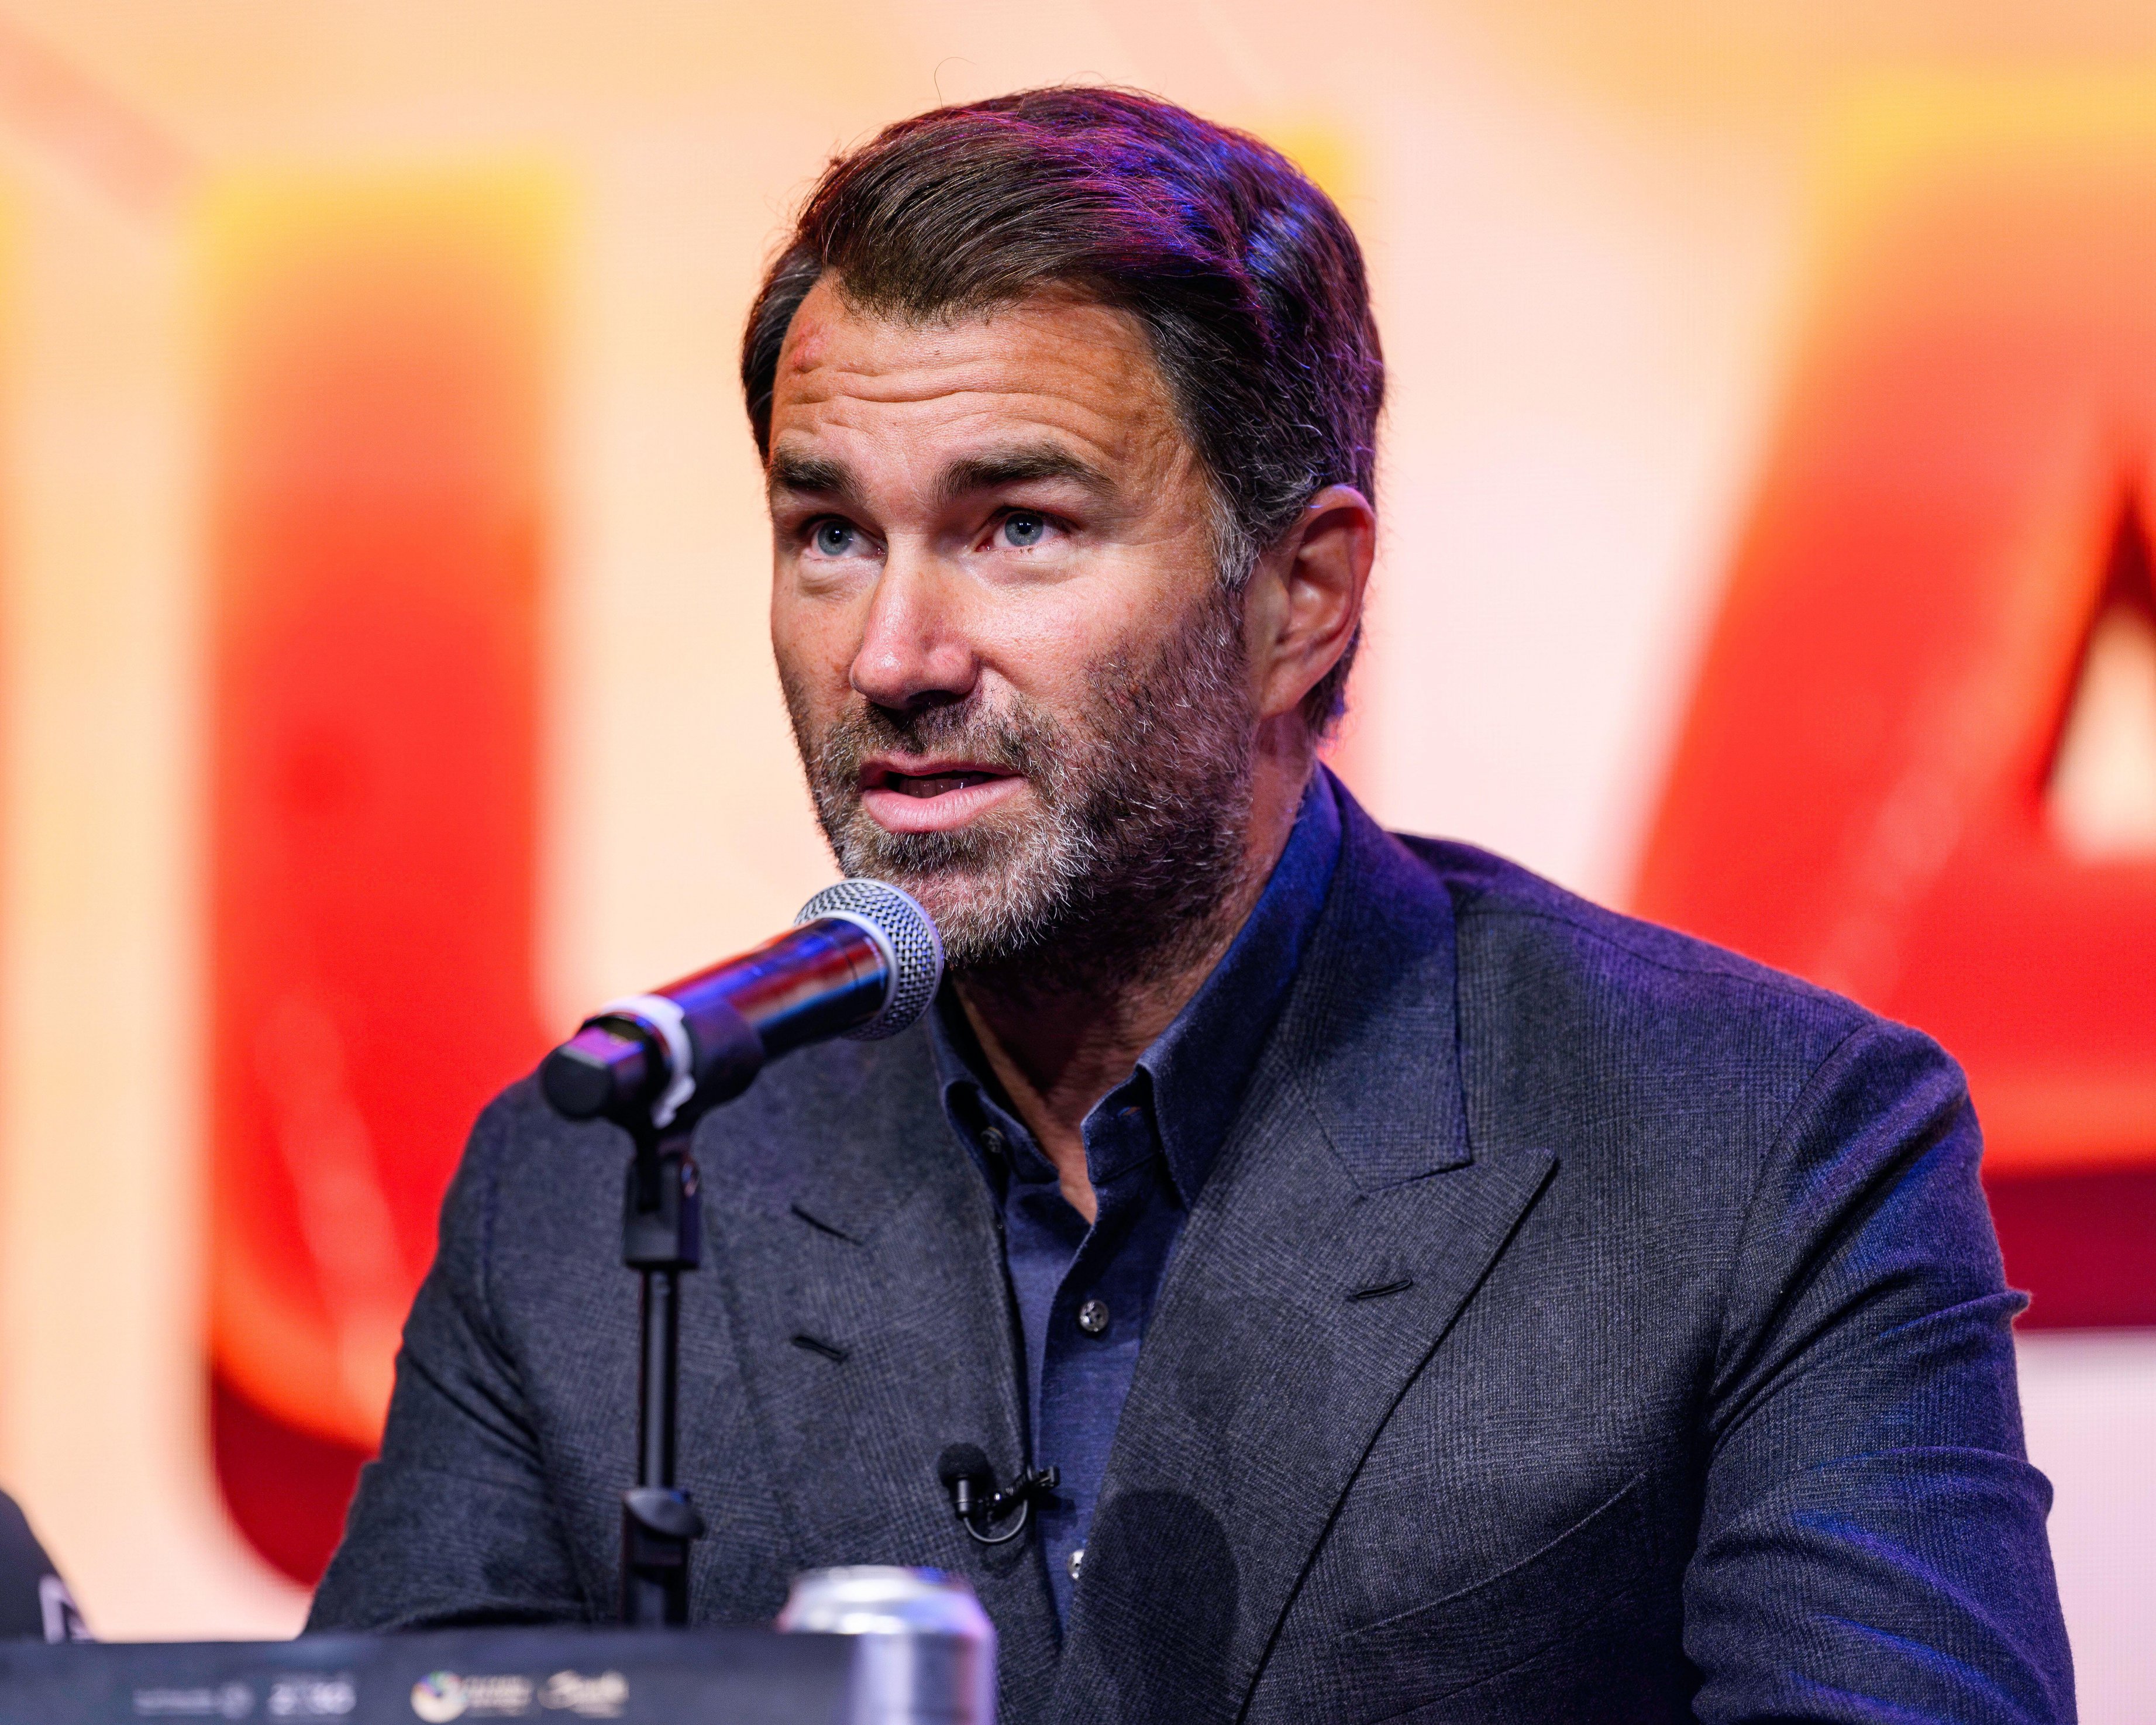 Hearn admits he's somewhat 'nervous' about the fight